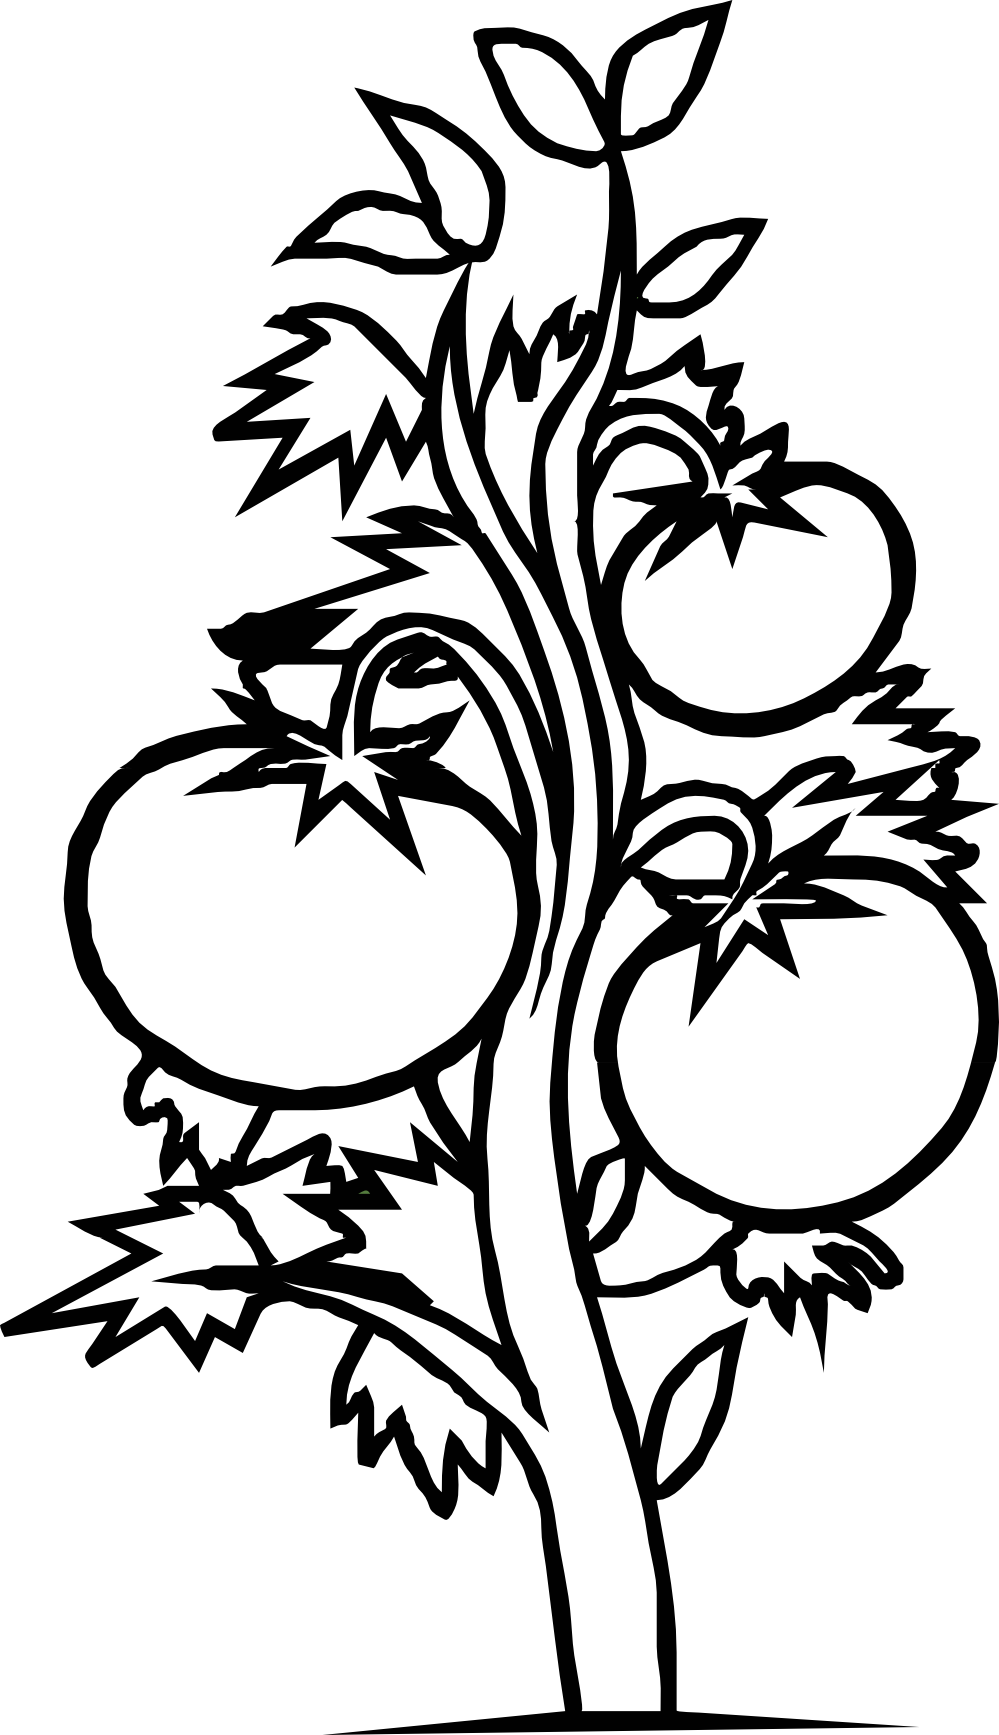 Peppers clipart black and white. Tomato panda free images